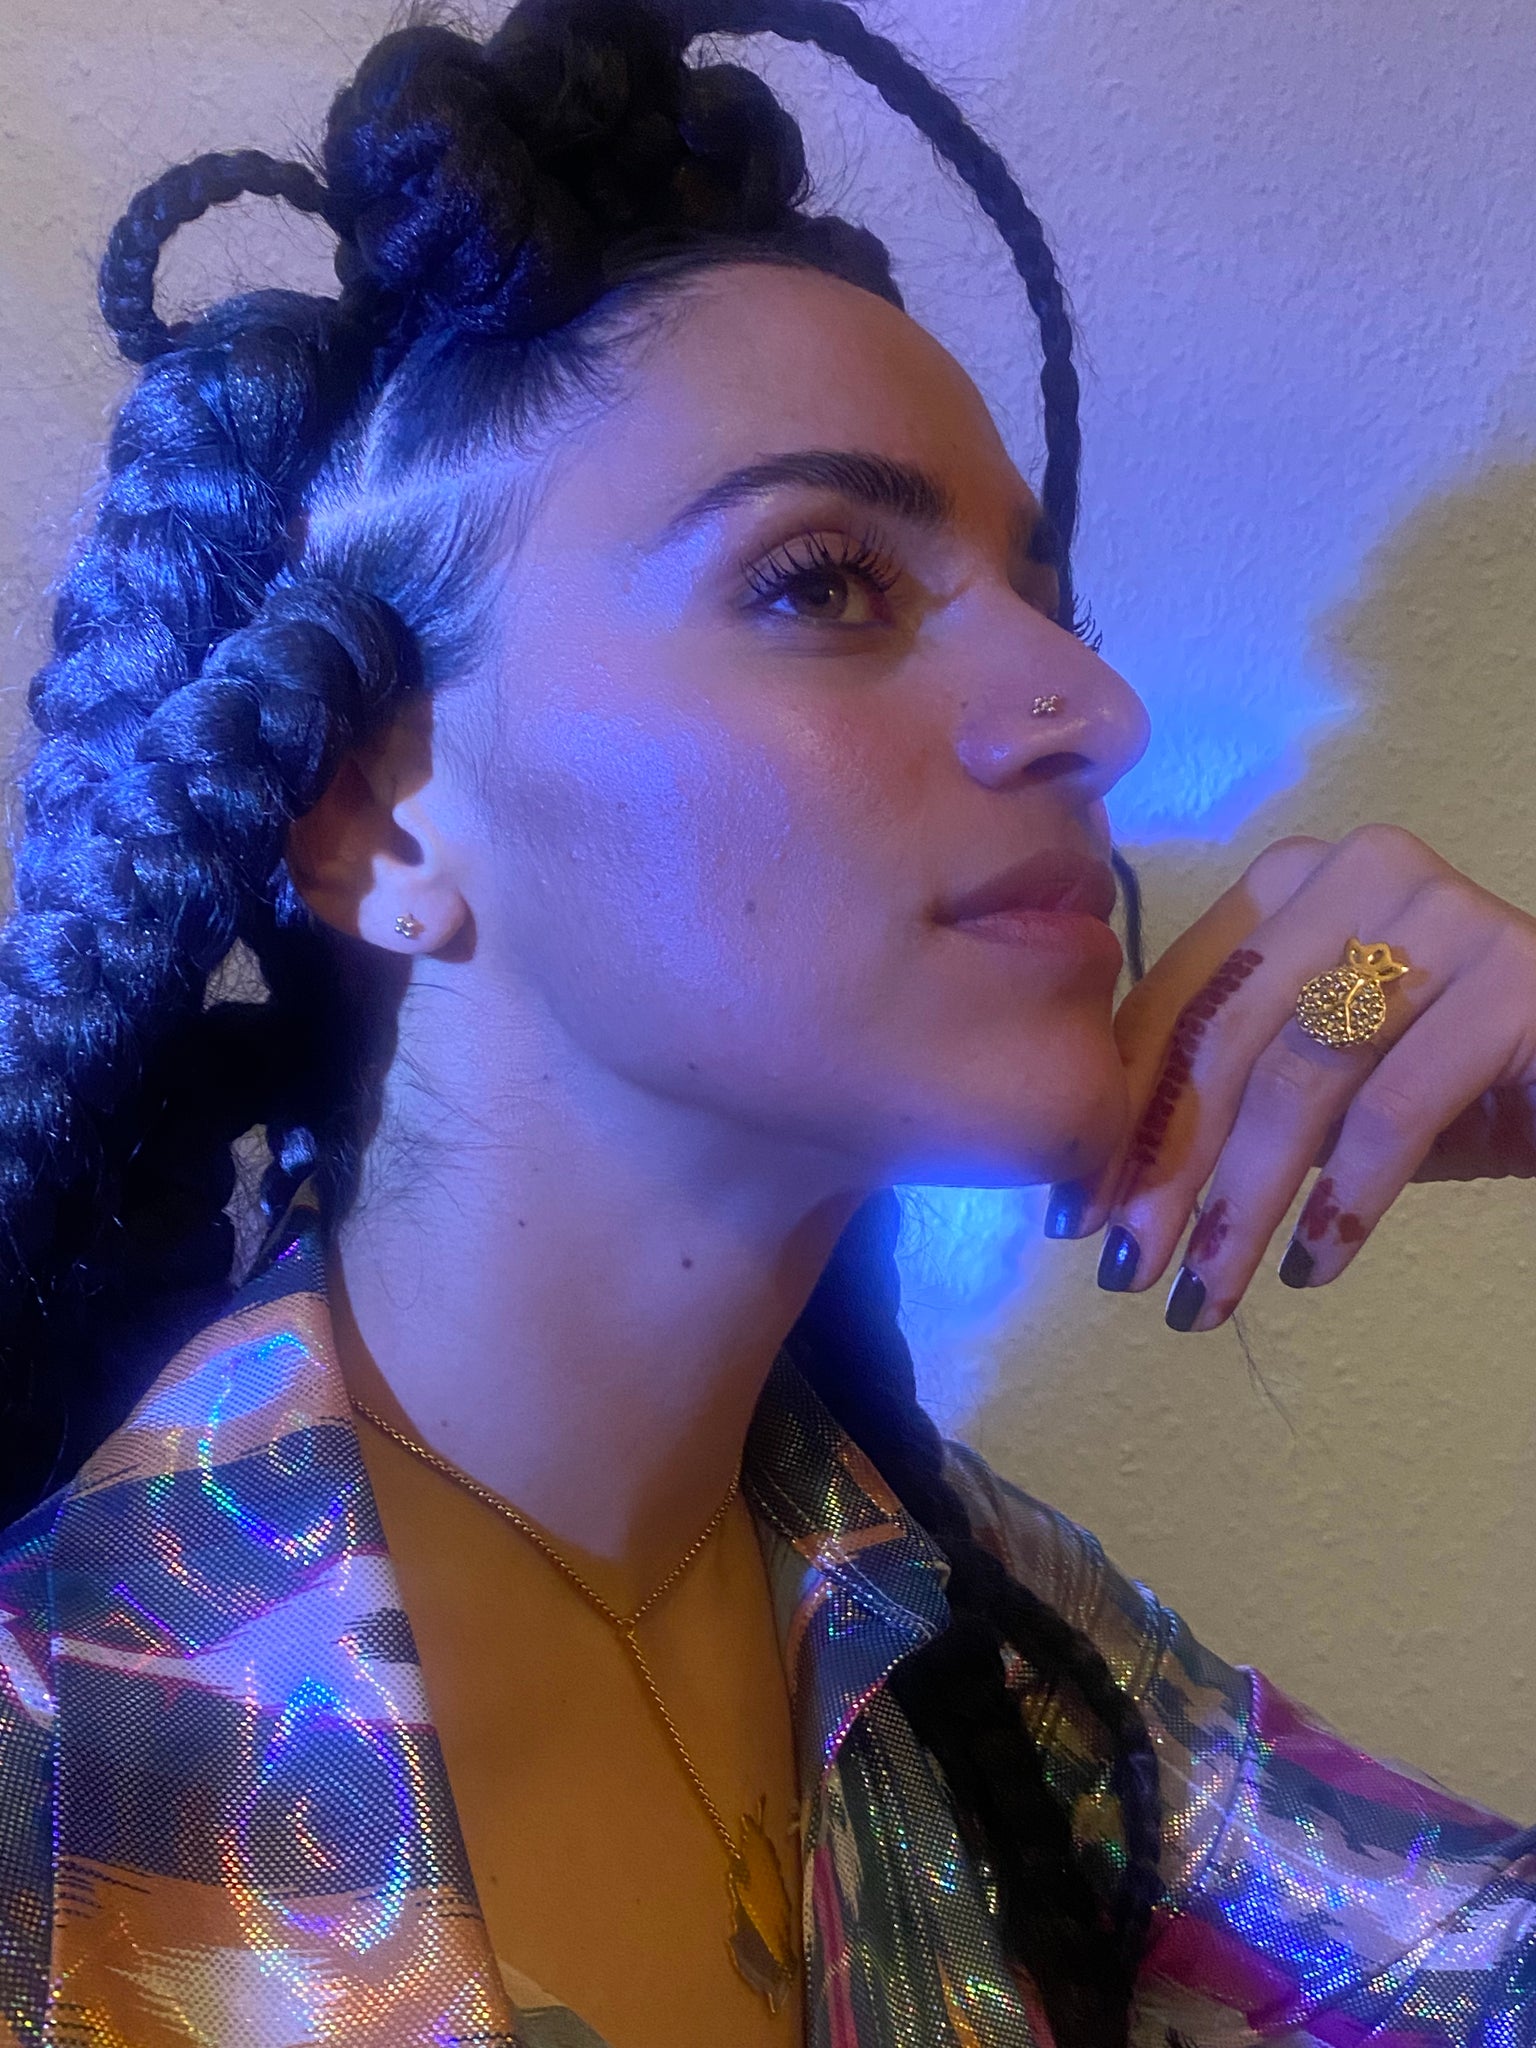 A blue ish light shines on the profile of a woman's face wearing gold studs in her nose and ear, and a pomegranate shaped gold ring.